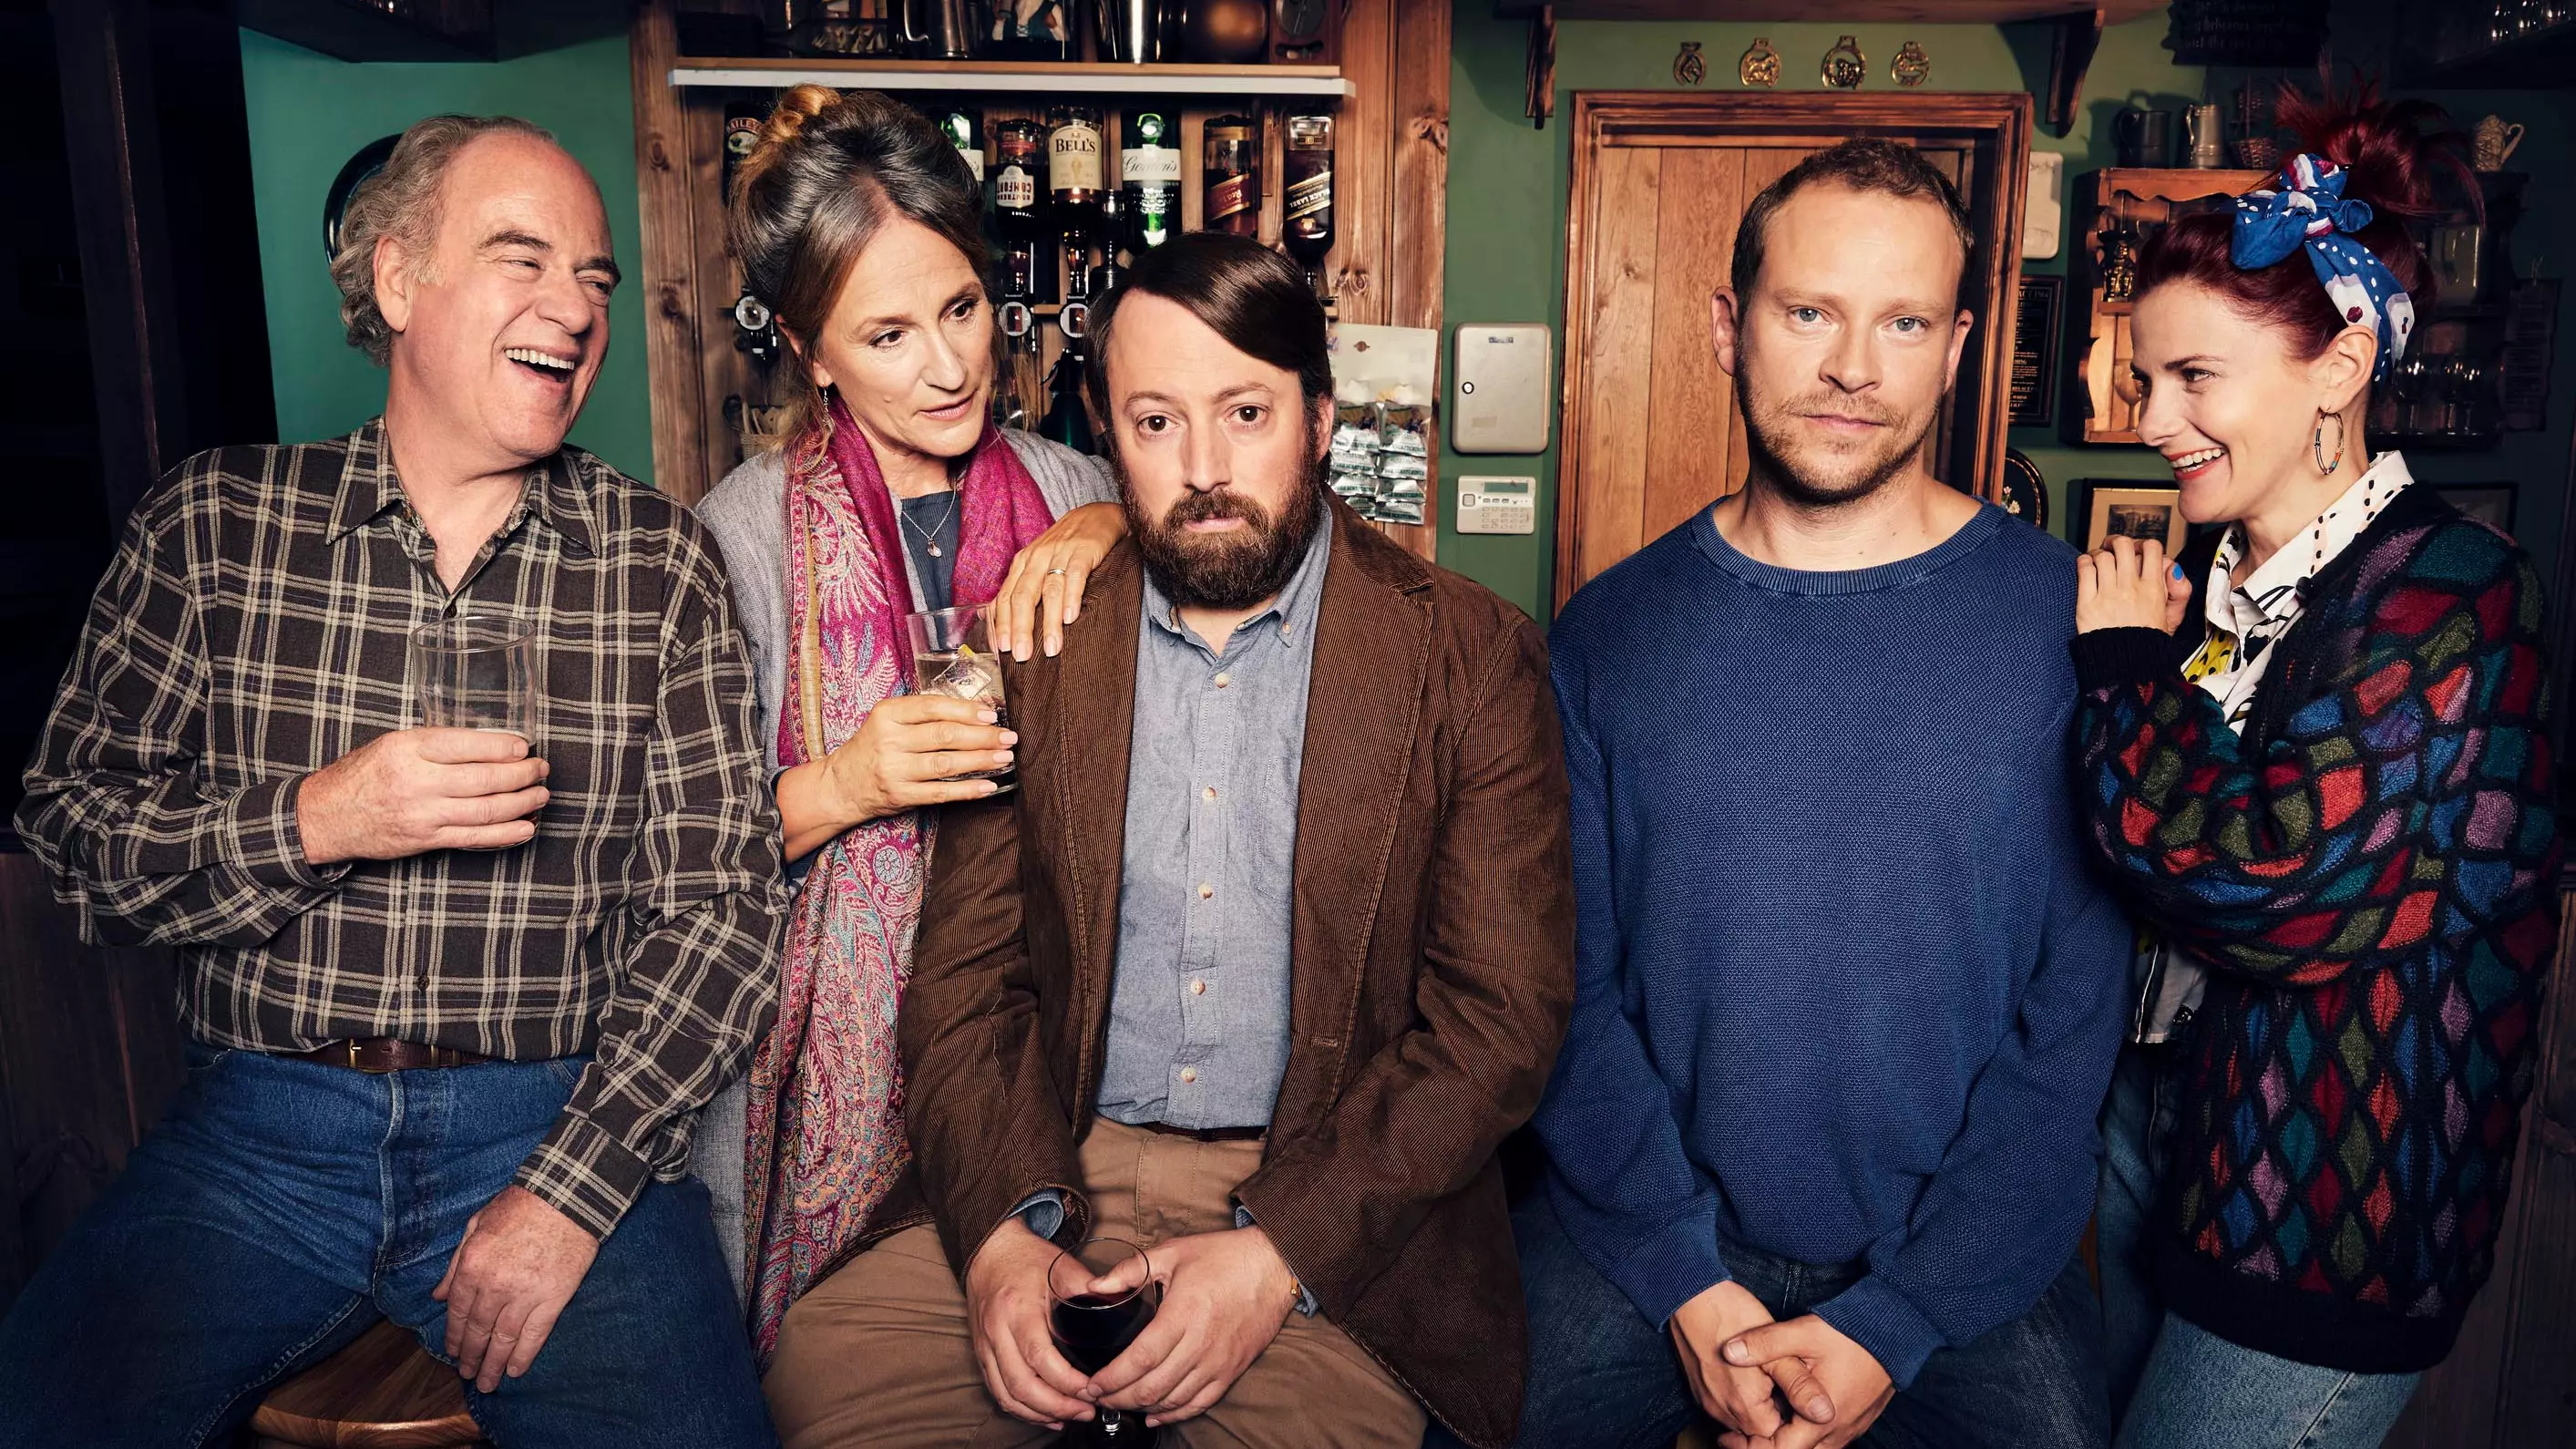 David Mitchell And Robert Webb Are Coming Back And We Hope It's As Good As Peep Show